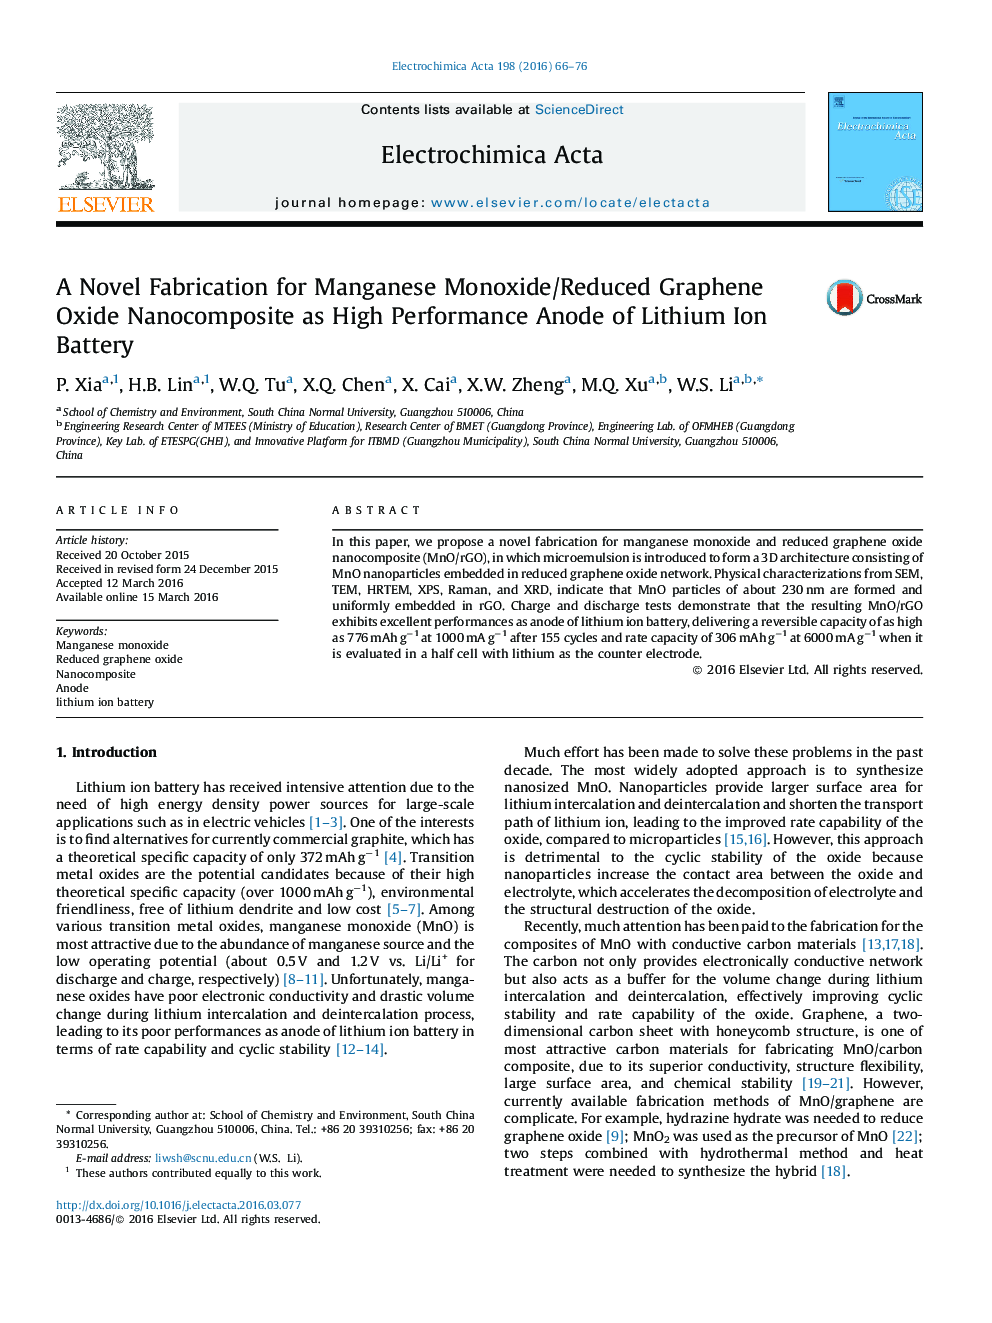 A Novel Fabrication for Manganese Monoxide/Reduced Graphene Oxide Nanocomposite as High Performance Anode of Lithium Ion Battery